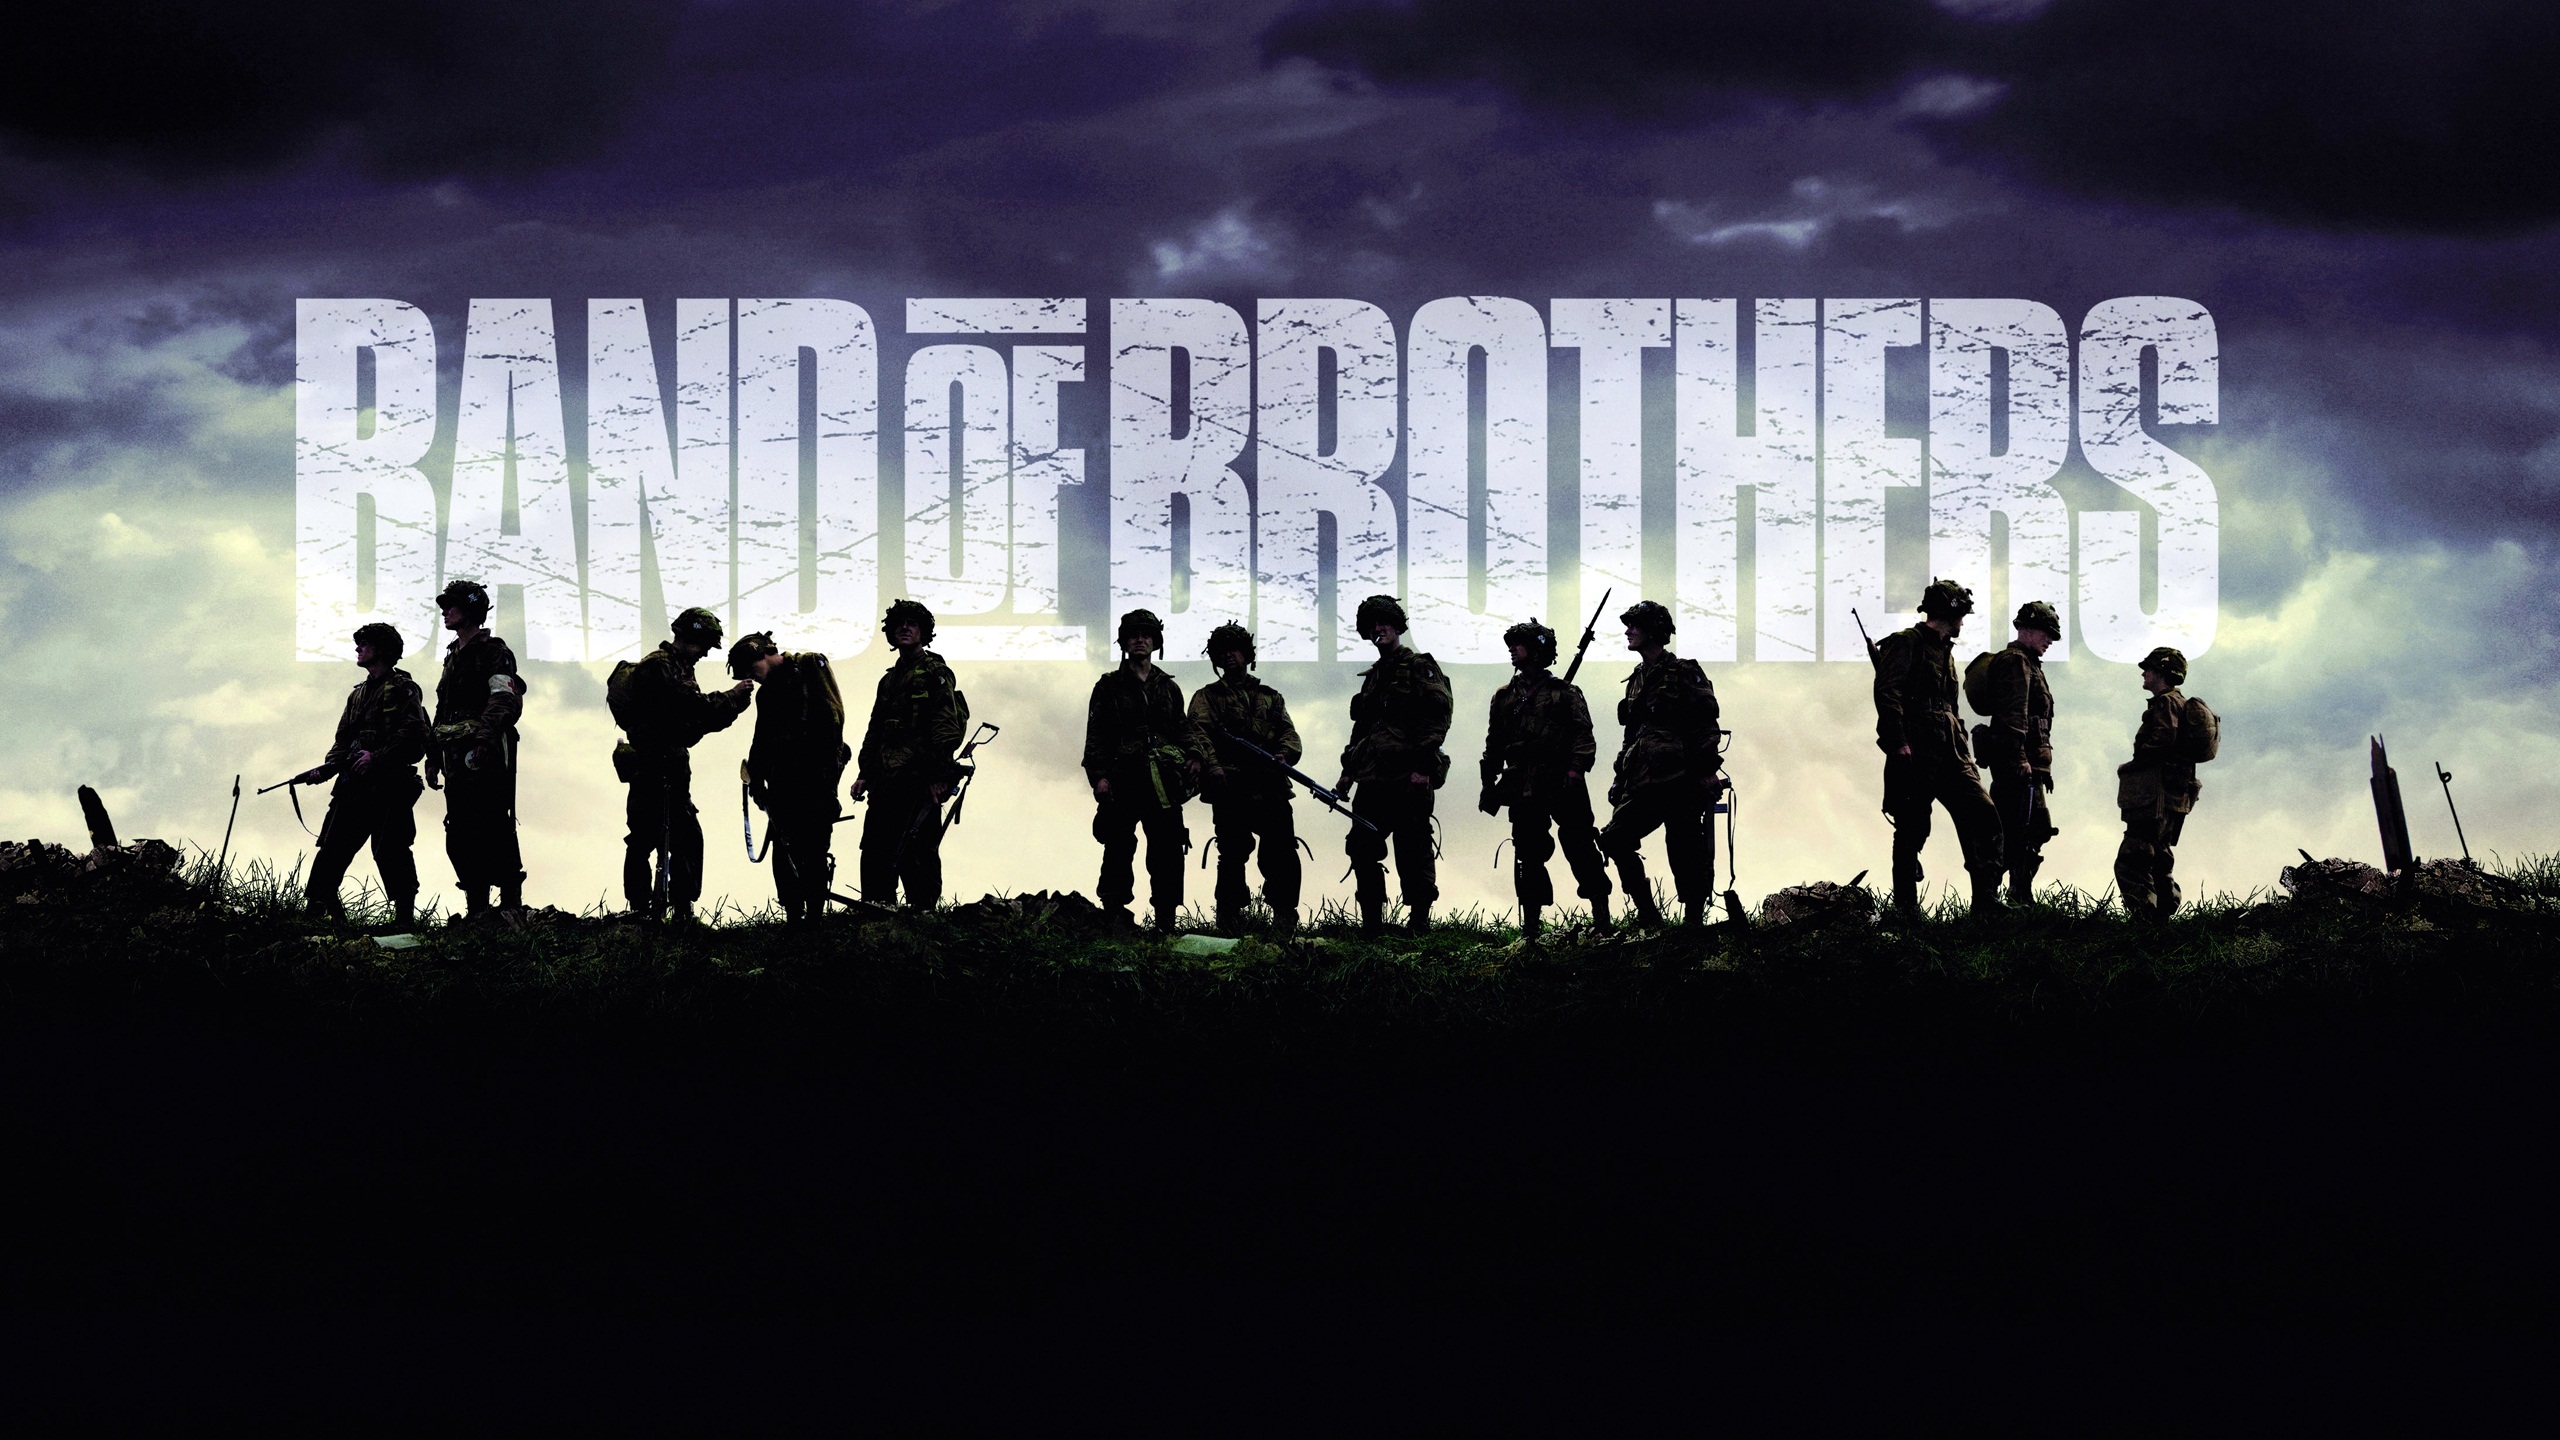 Band Of Brothers In 2560 1440 Pixel All Men Here For A Common Objective Unite And Cooperation Mean A Lot Tv Movies Wallpaper Free Wallpaper World